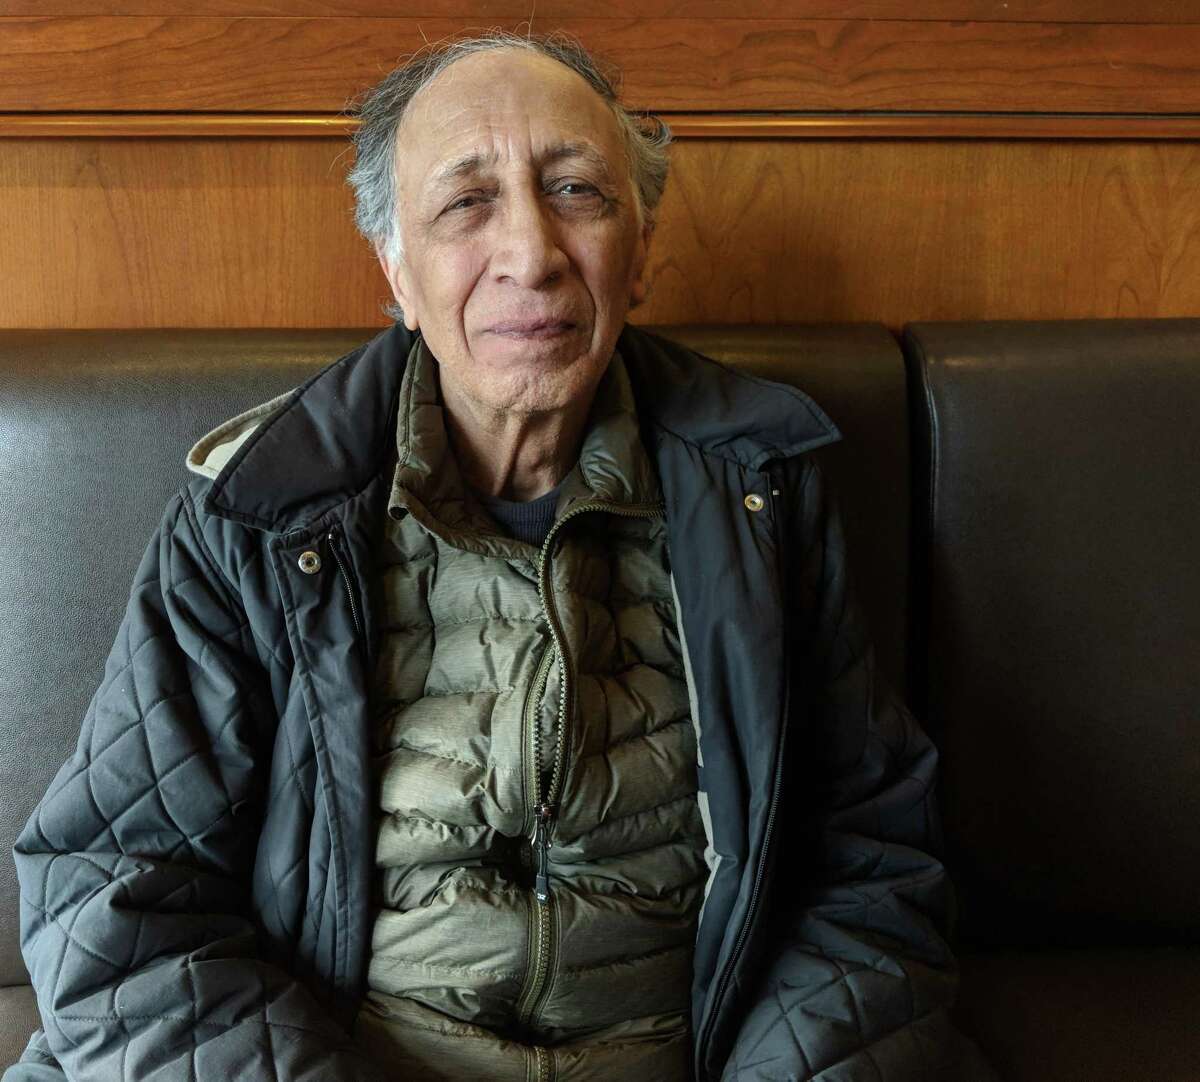 Reza Bashirrad came to the United States to study engineering and although he went back to Iran to work for some time, he found his way back to America 38 years ago and has been living in Old Greenwich ever since. Now he can be seen at the Edge Fitness Club and Starbucks in Riverside, Conn.